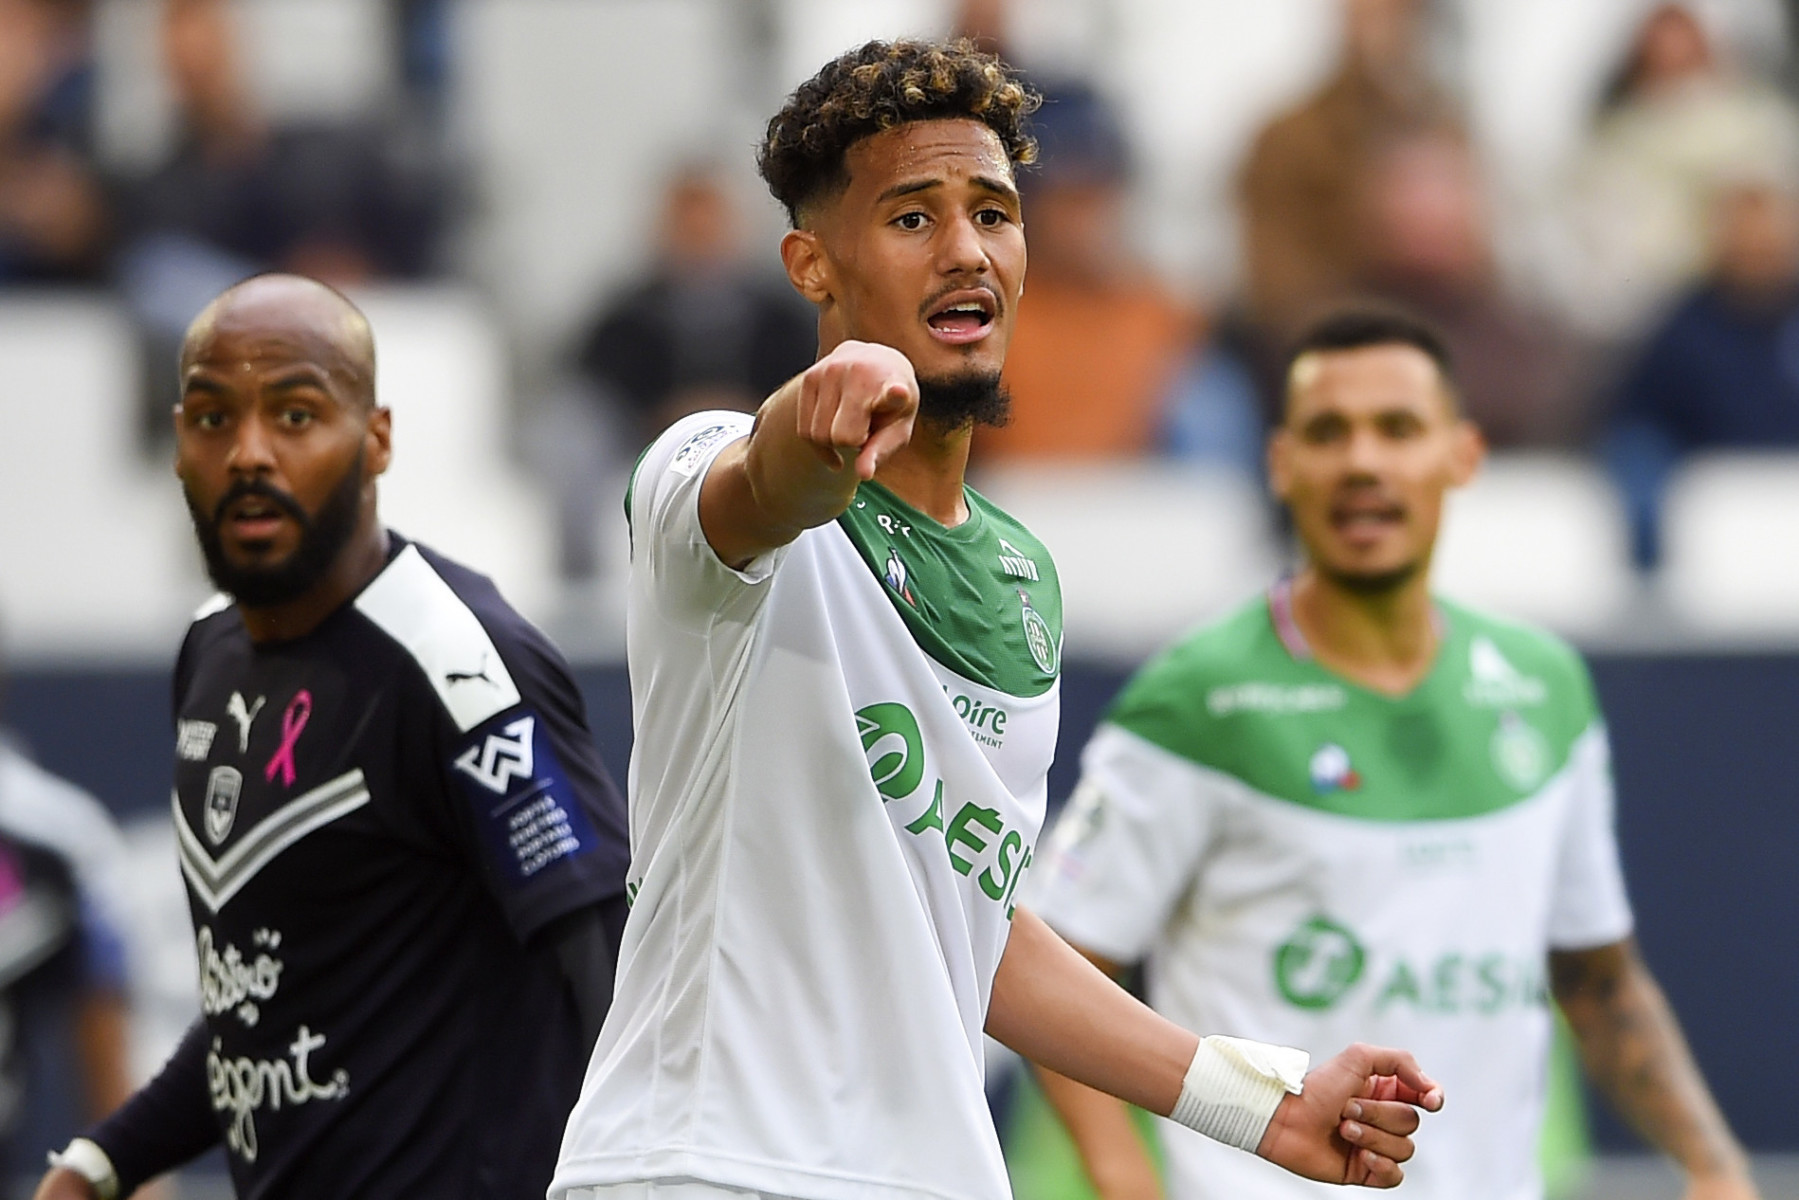 , William Saliba will walk into Arsenal defence but Arteta must find him a partner in transfer market, says Kevin Campbell